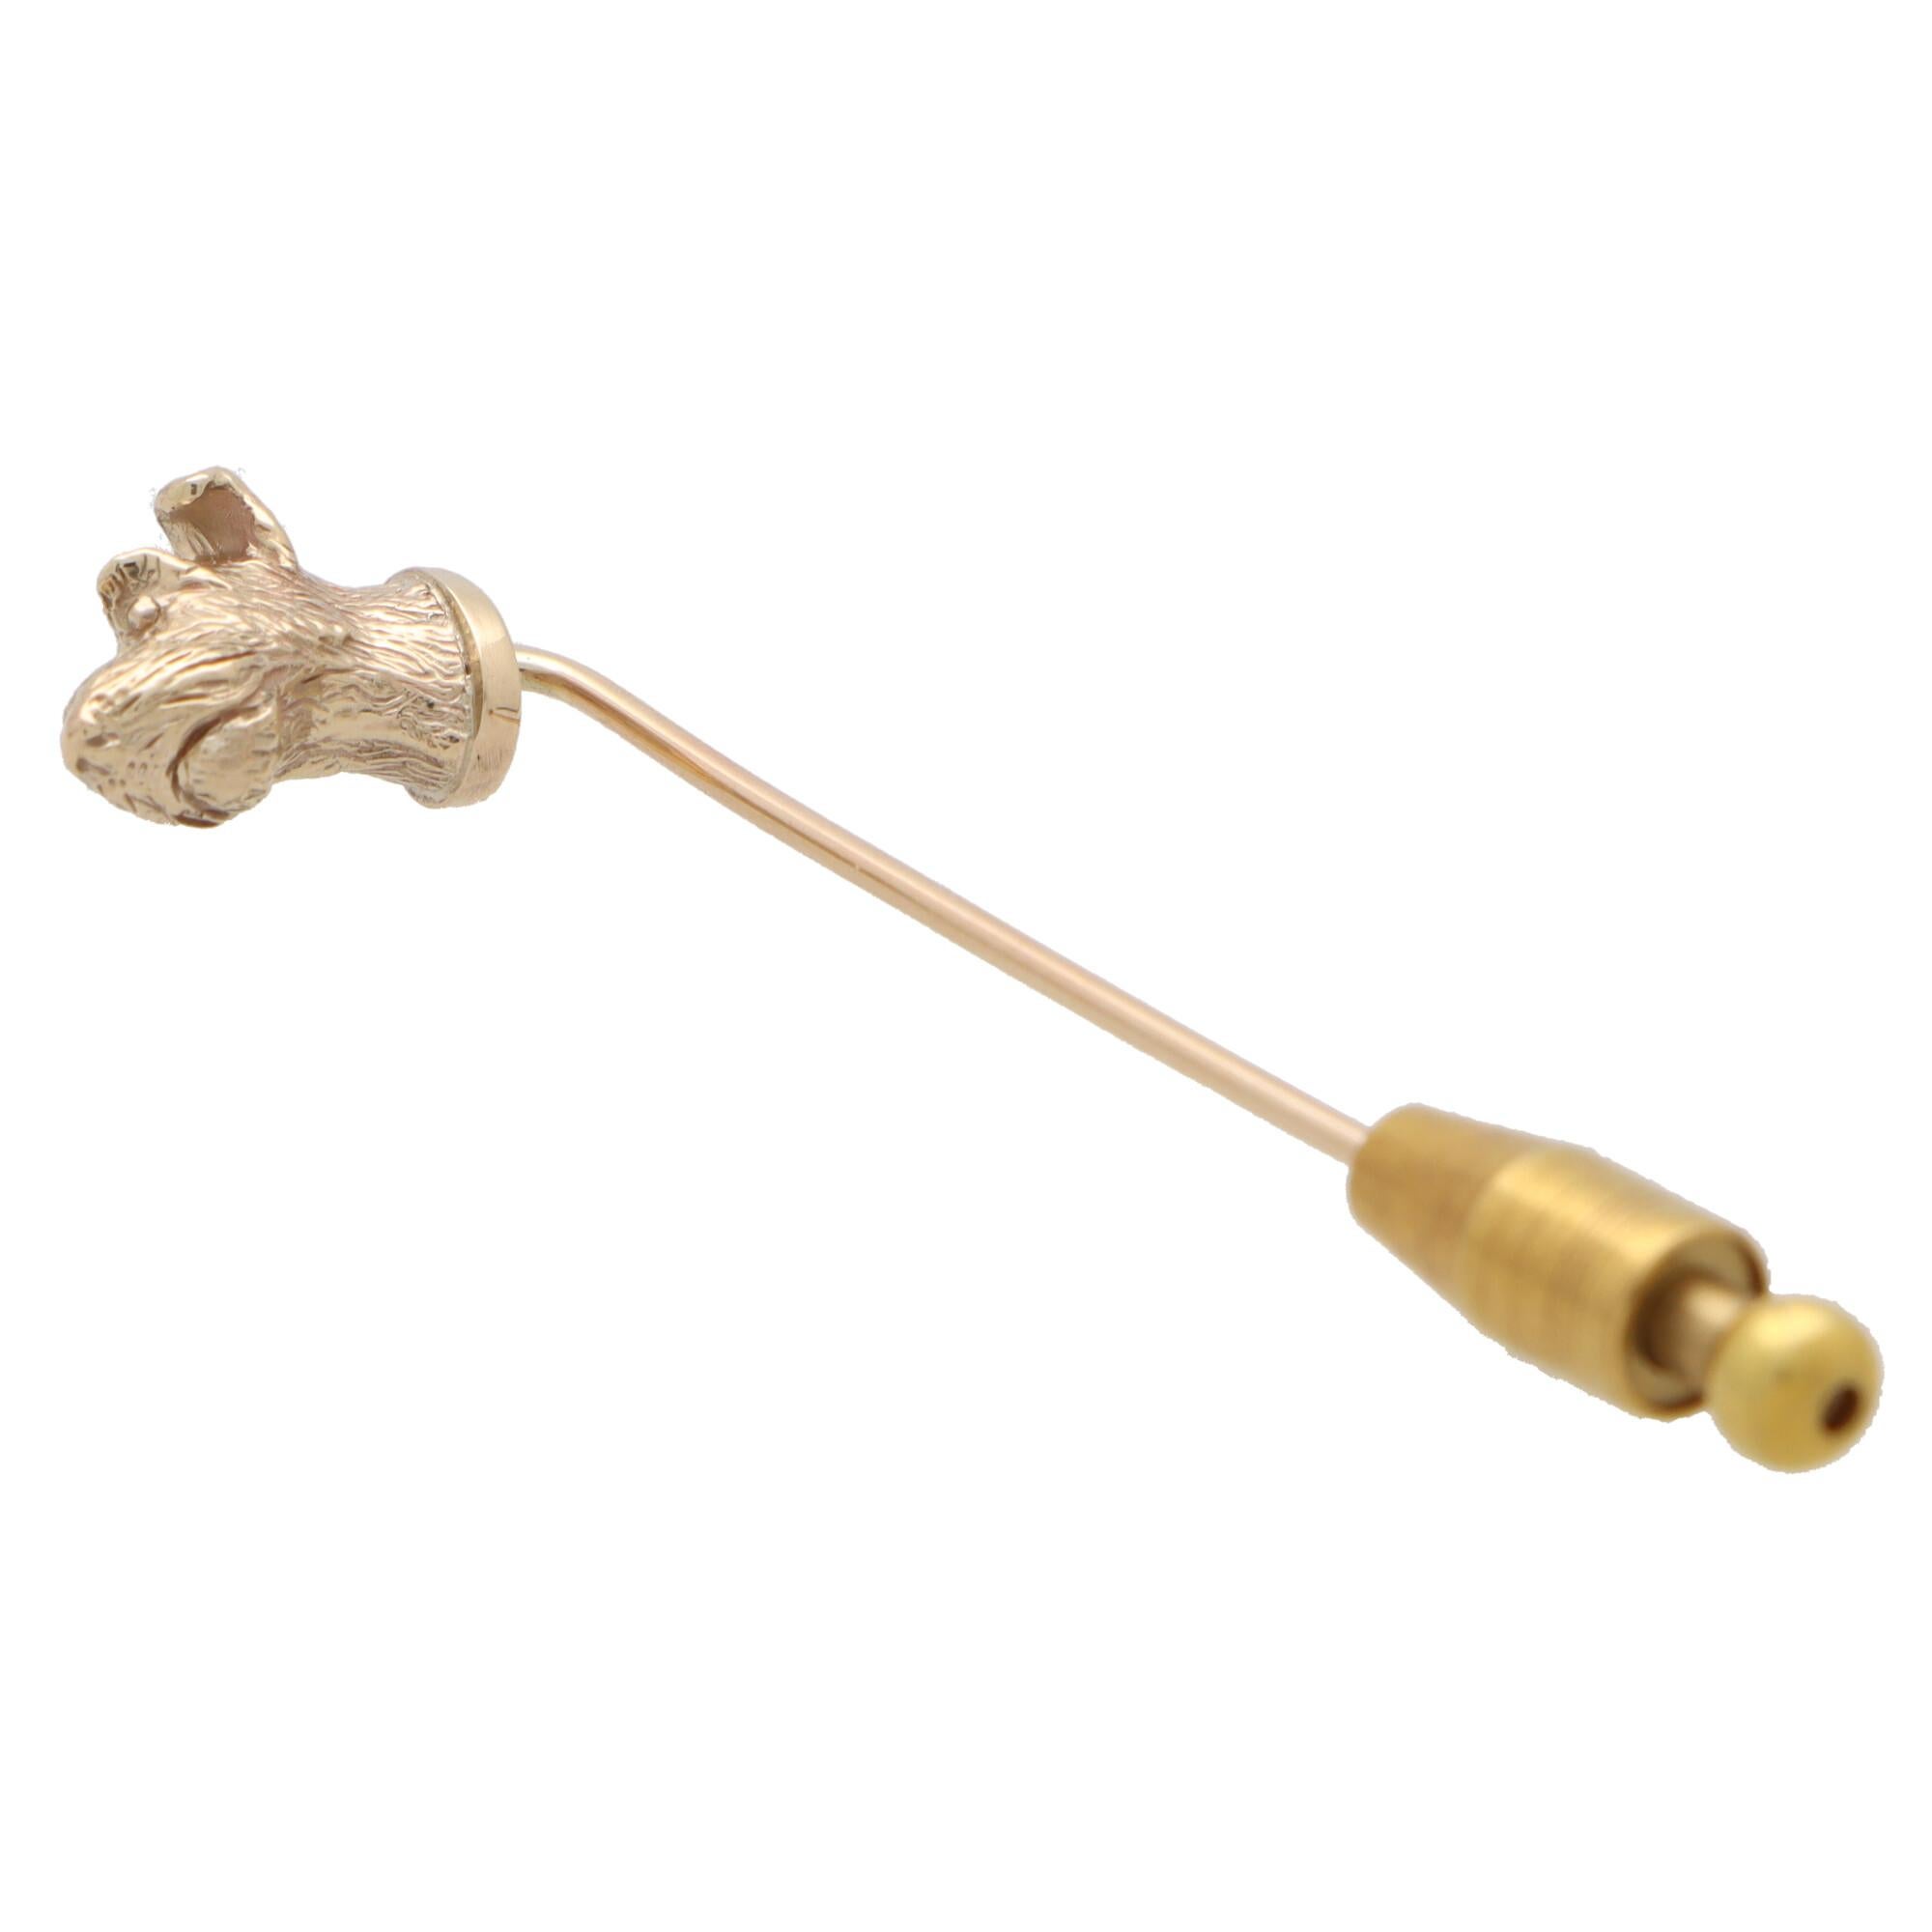 A lovely solid gold Terrier dog head stick pin set in 9k yellow gold. 

The stick pin solely features a beautiful terrier head which sits proudly on a classic stick pin fitting. The terrier has been intricately hand detailed so that the wearer can